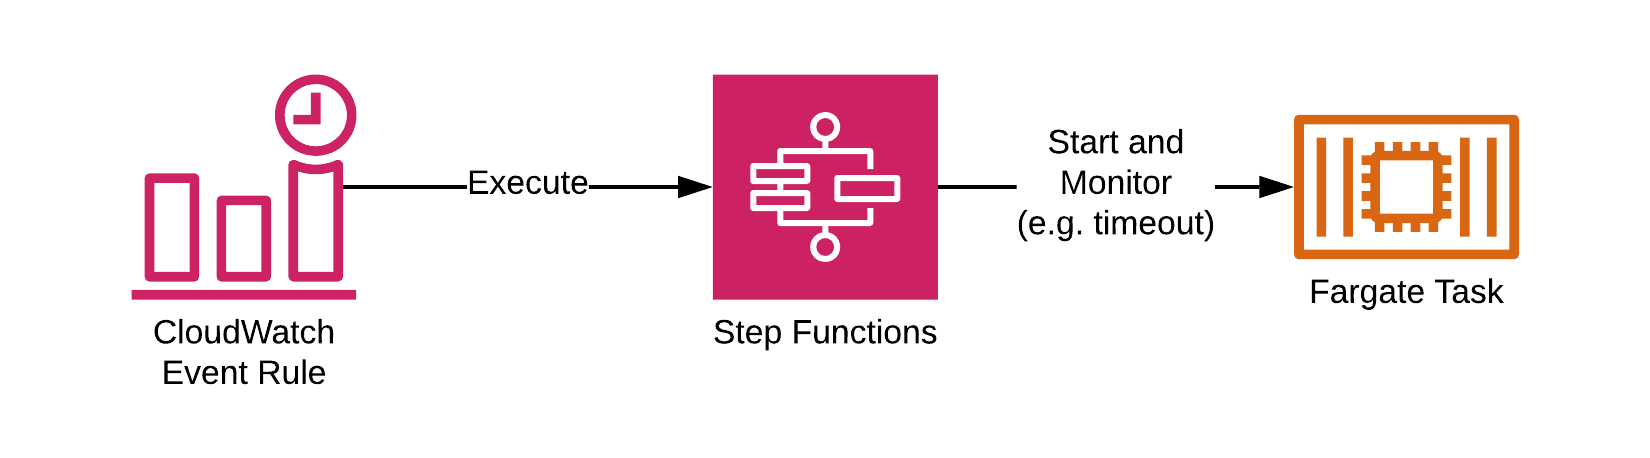 A CloudWatch Events Rule triggers a Step Function which starts an ECS task